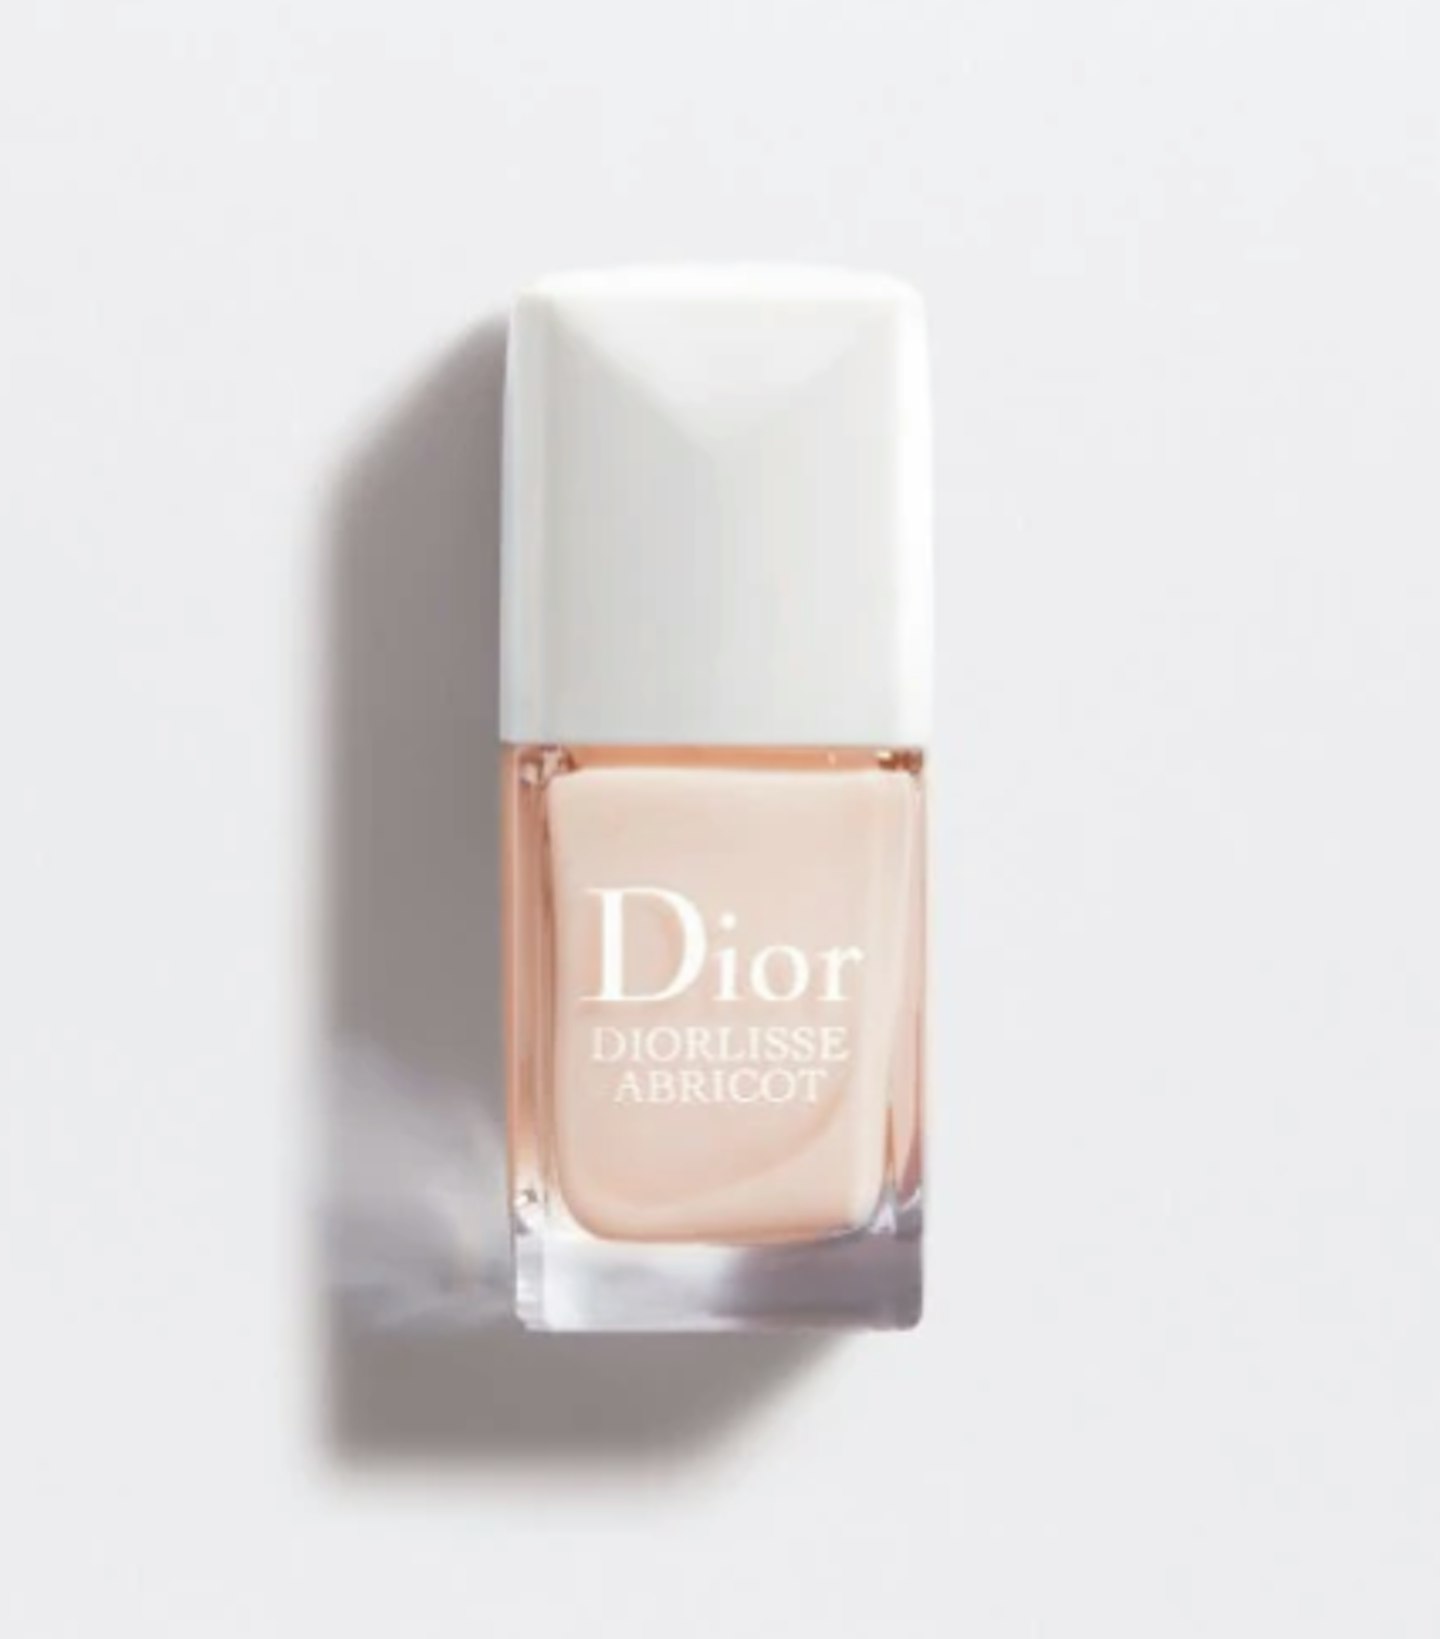 Dior Diorlisse Abricot Smoothing Perfecting Nail Care, £22